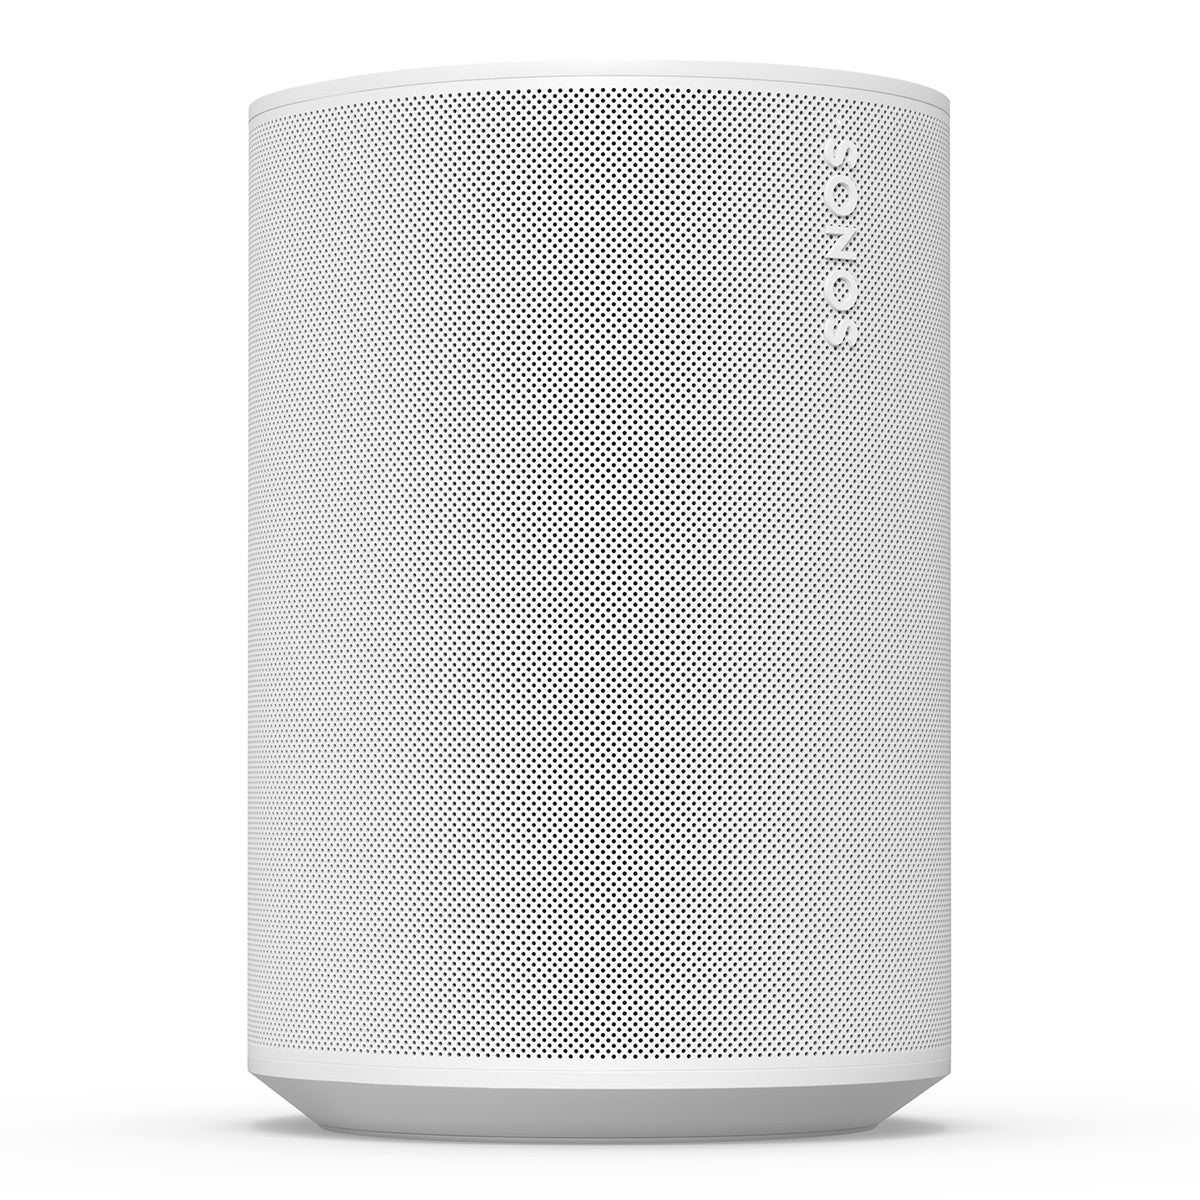 Sonos Era 100 Voice-Controlled Wireless Bluetooth Smart Speaker with Line-In 3.5mm to USB-C Adapter (White)